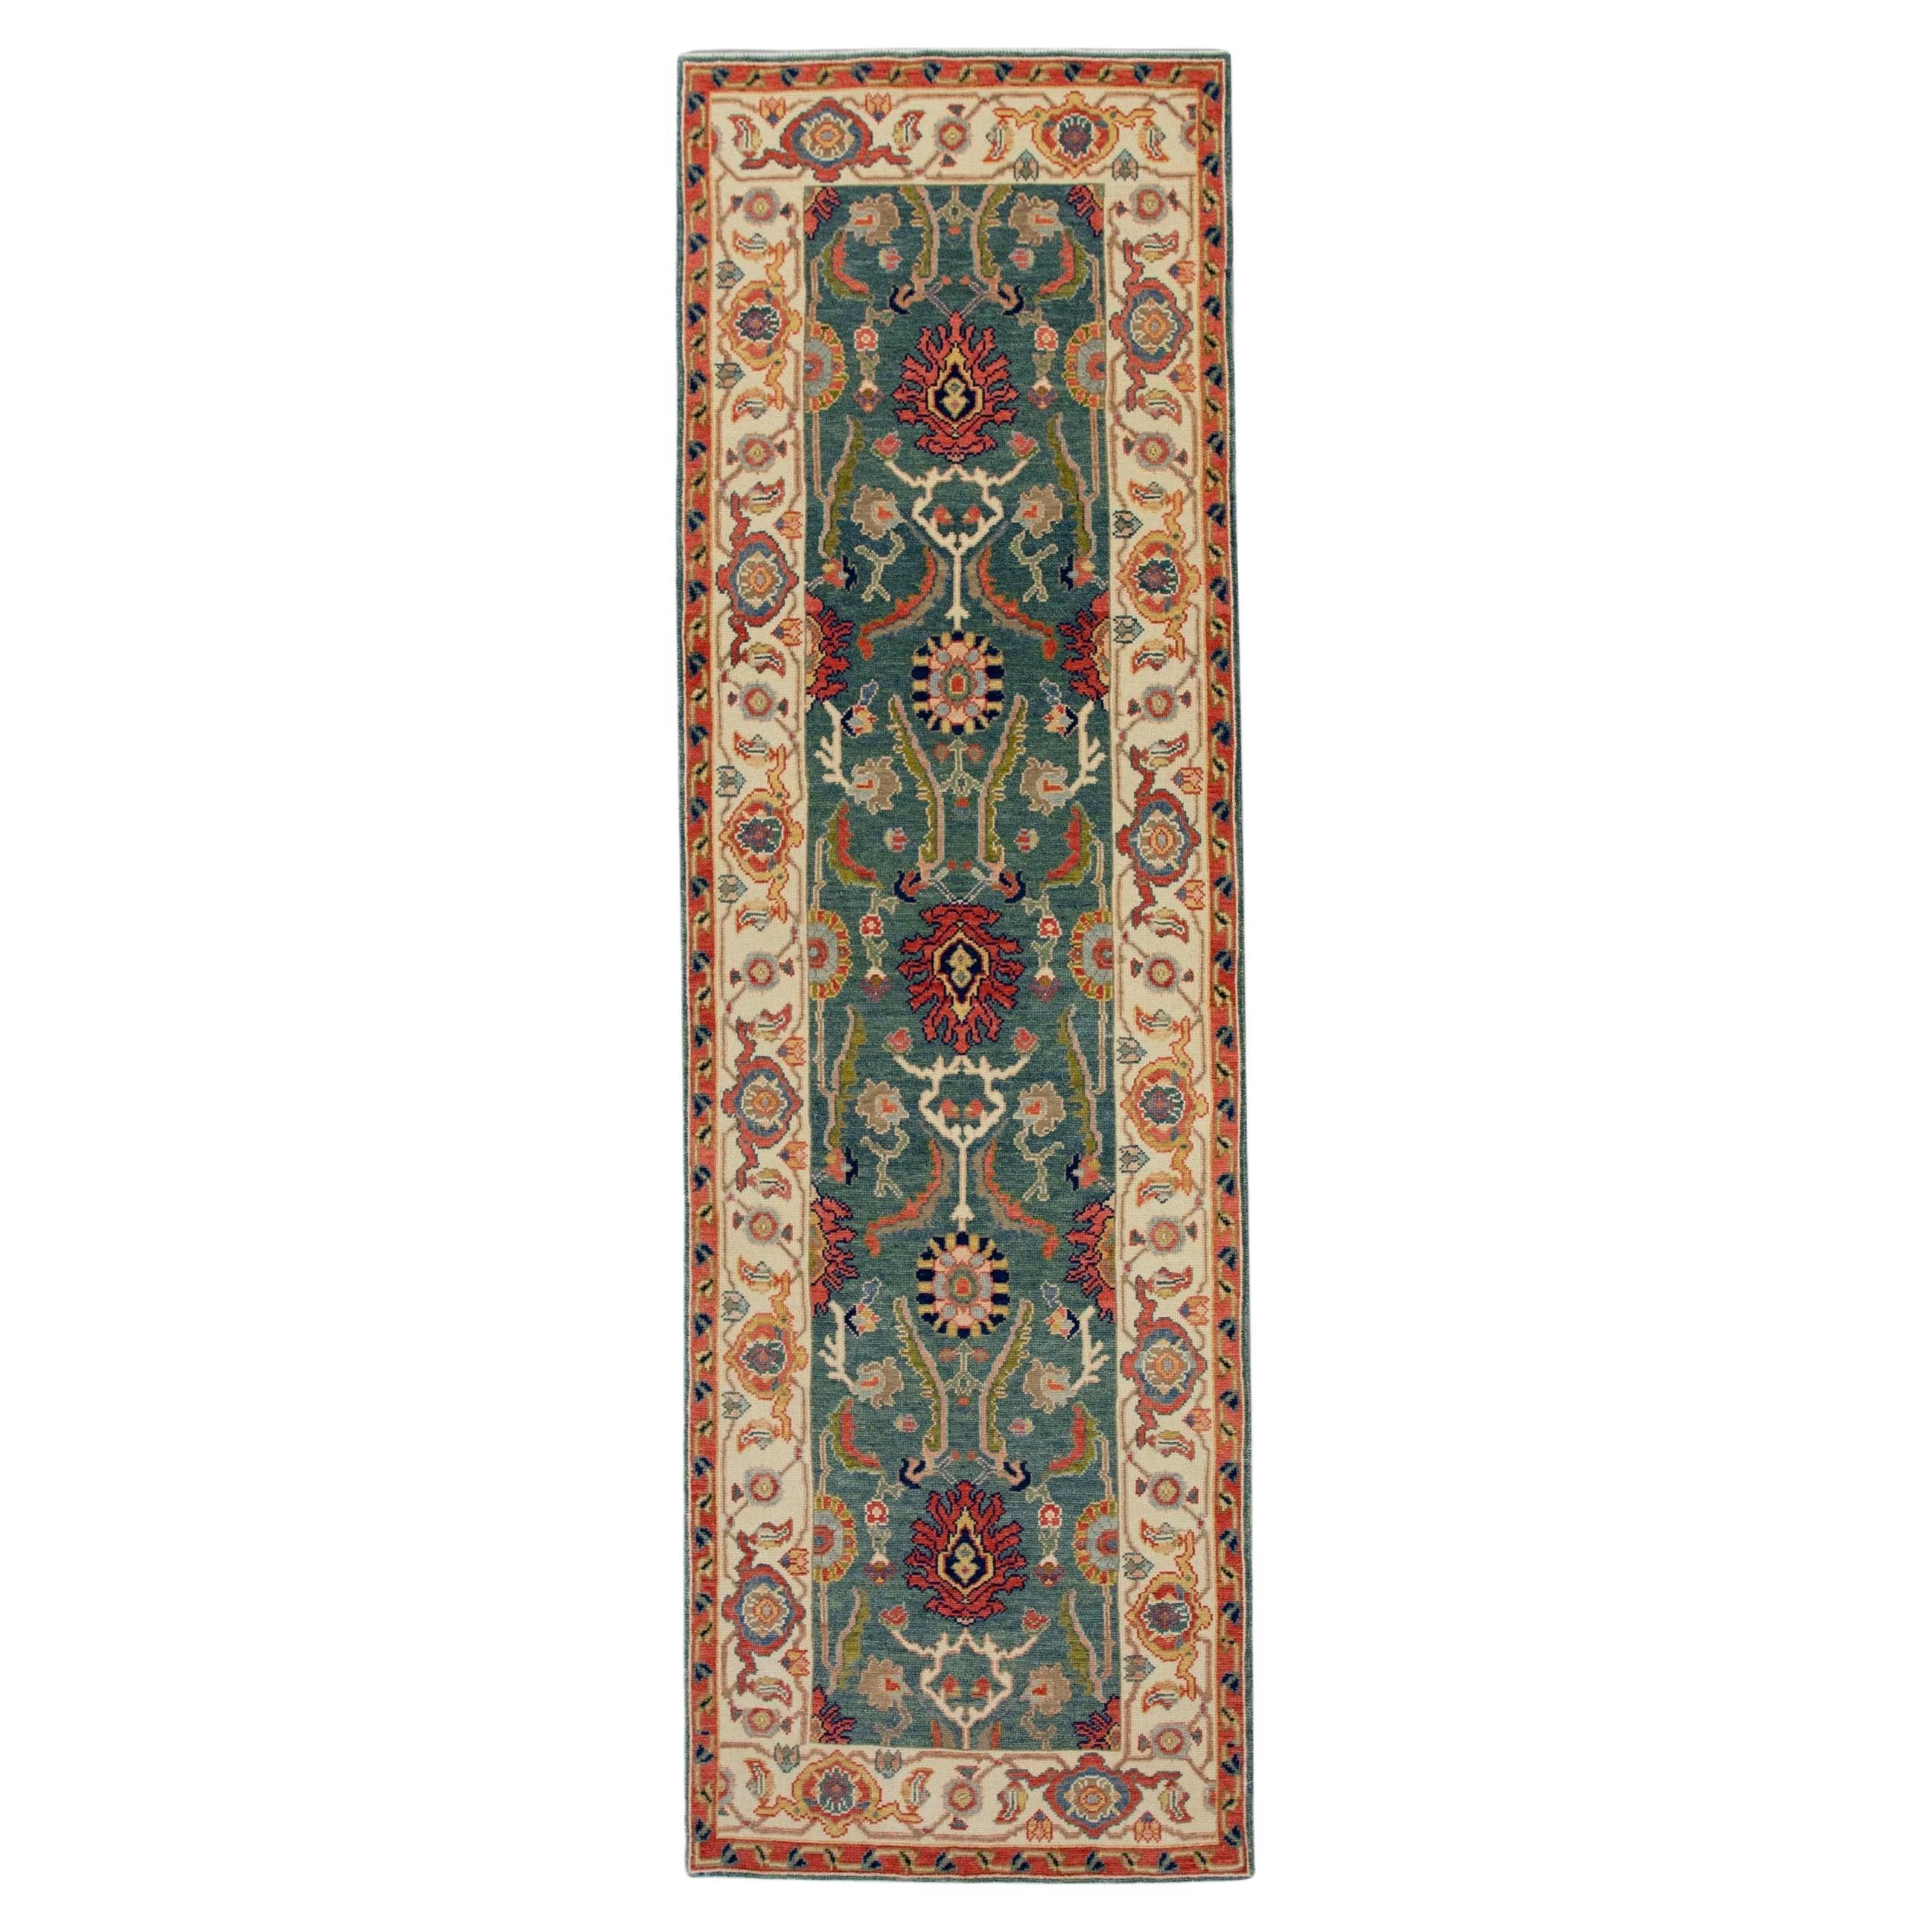 Cream, Green, and Red Floral Turkish Finewoven Wool Oushak Rug 2'7" x 8'5"